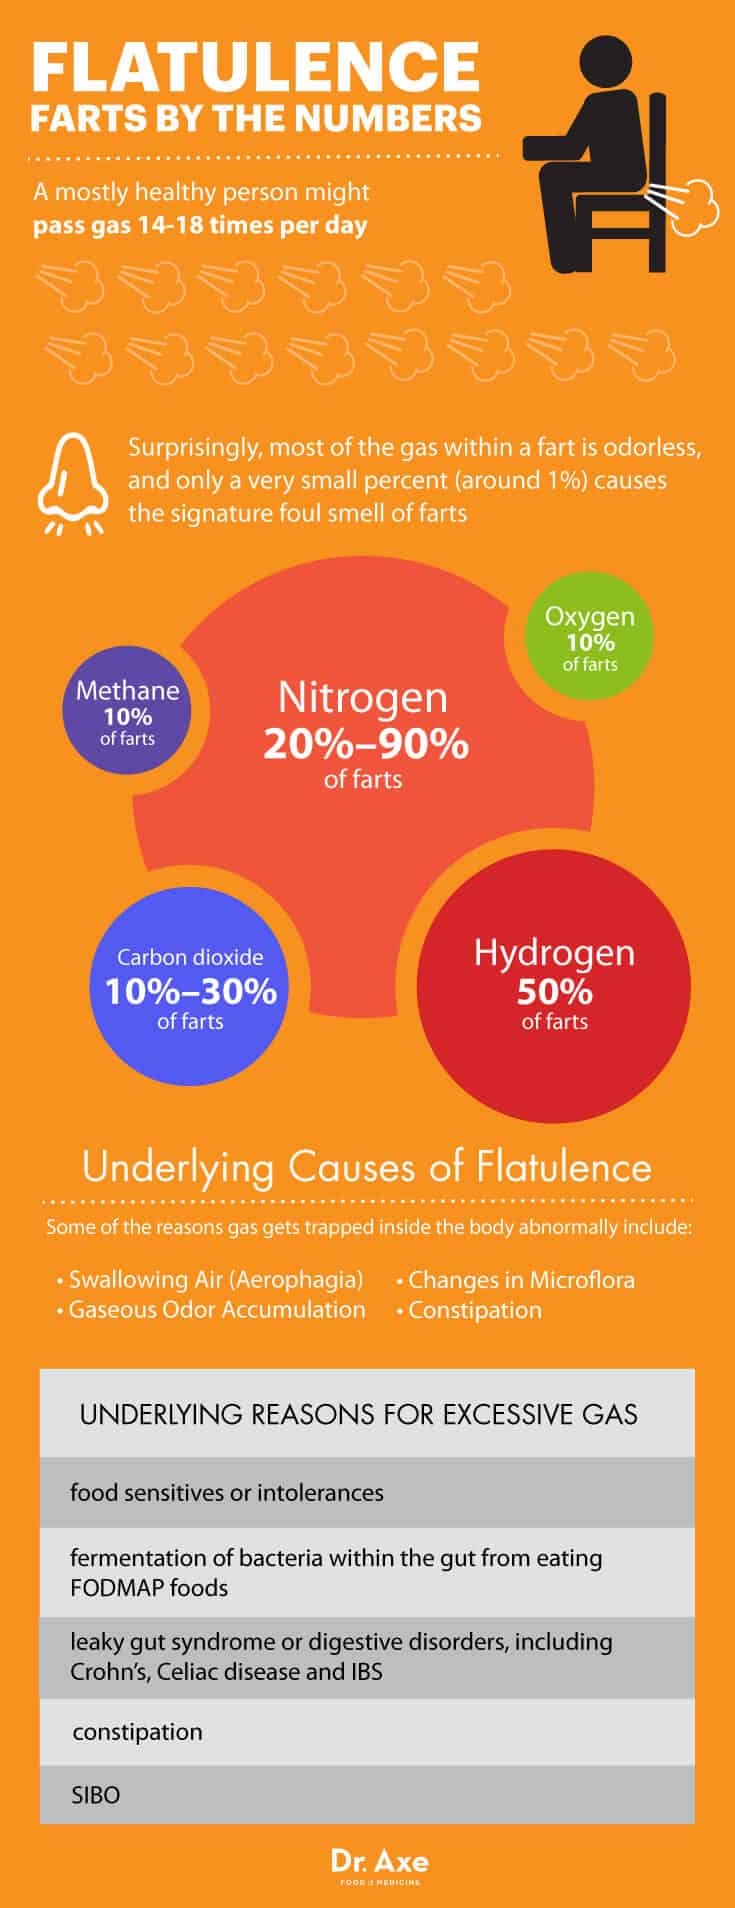 Flatulence by the numbers - Dr. Axe